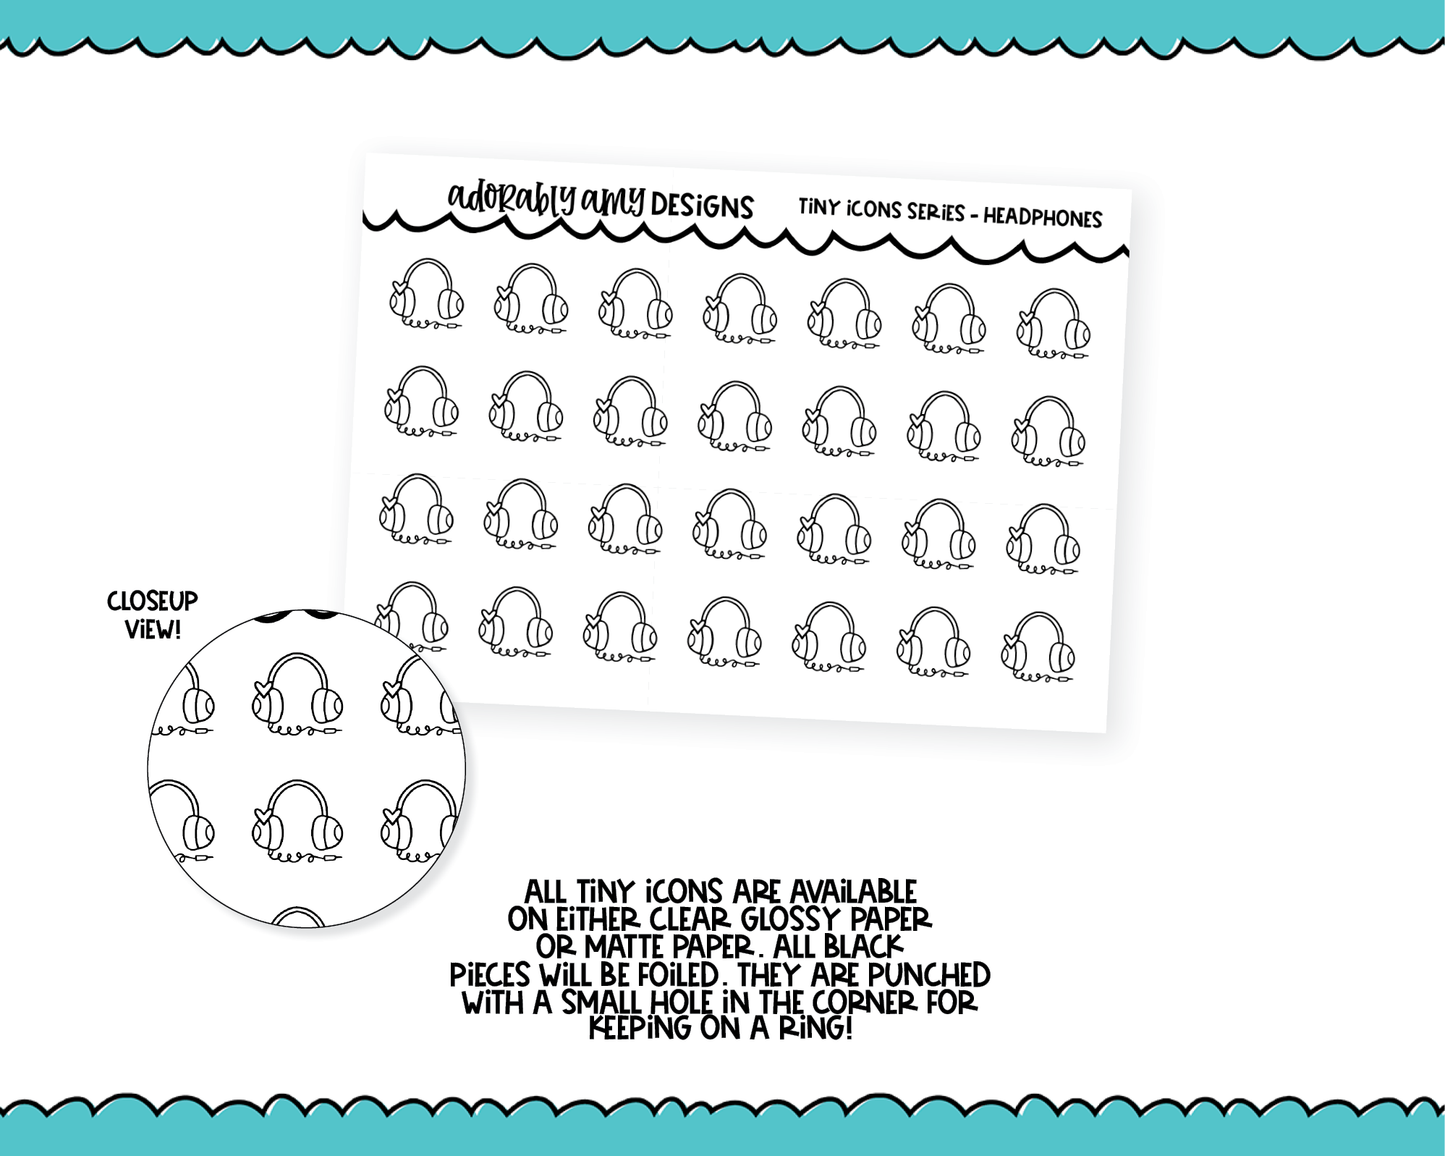 Foiled Tiny Icon Series - Headphones Tiny Size Planner Stickers for any Planner or Insert